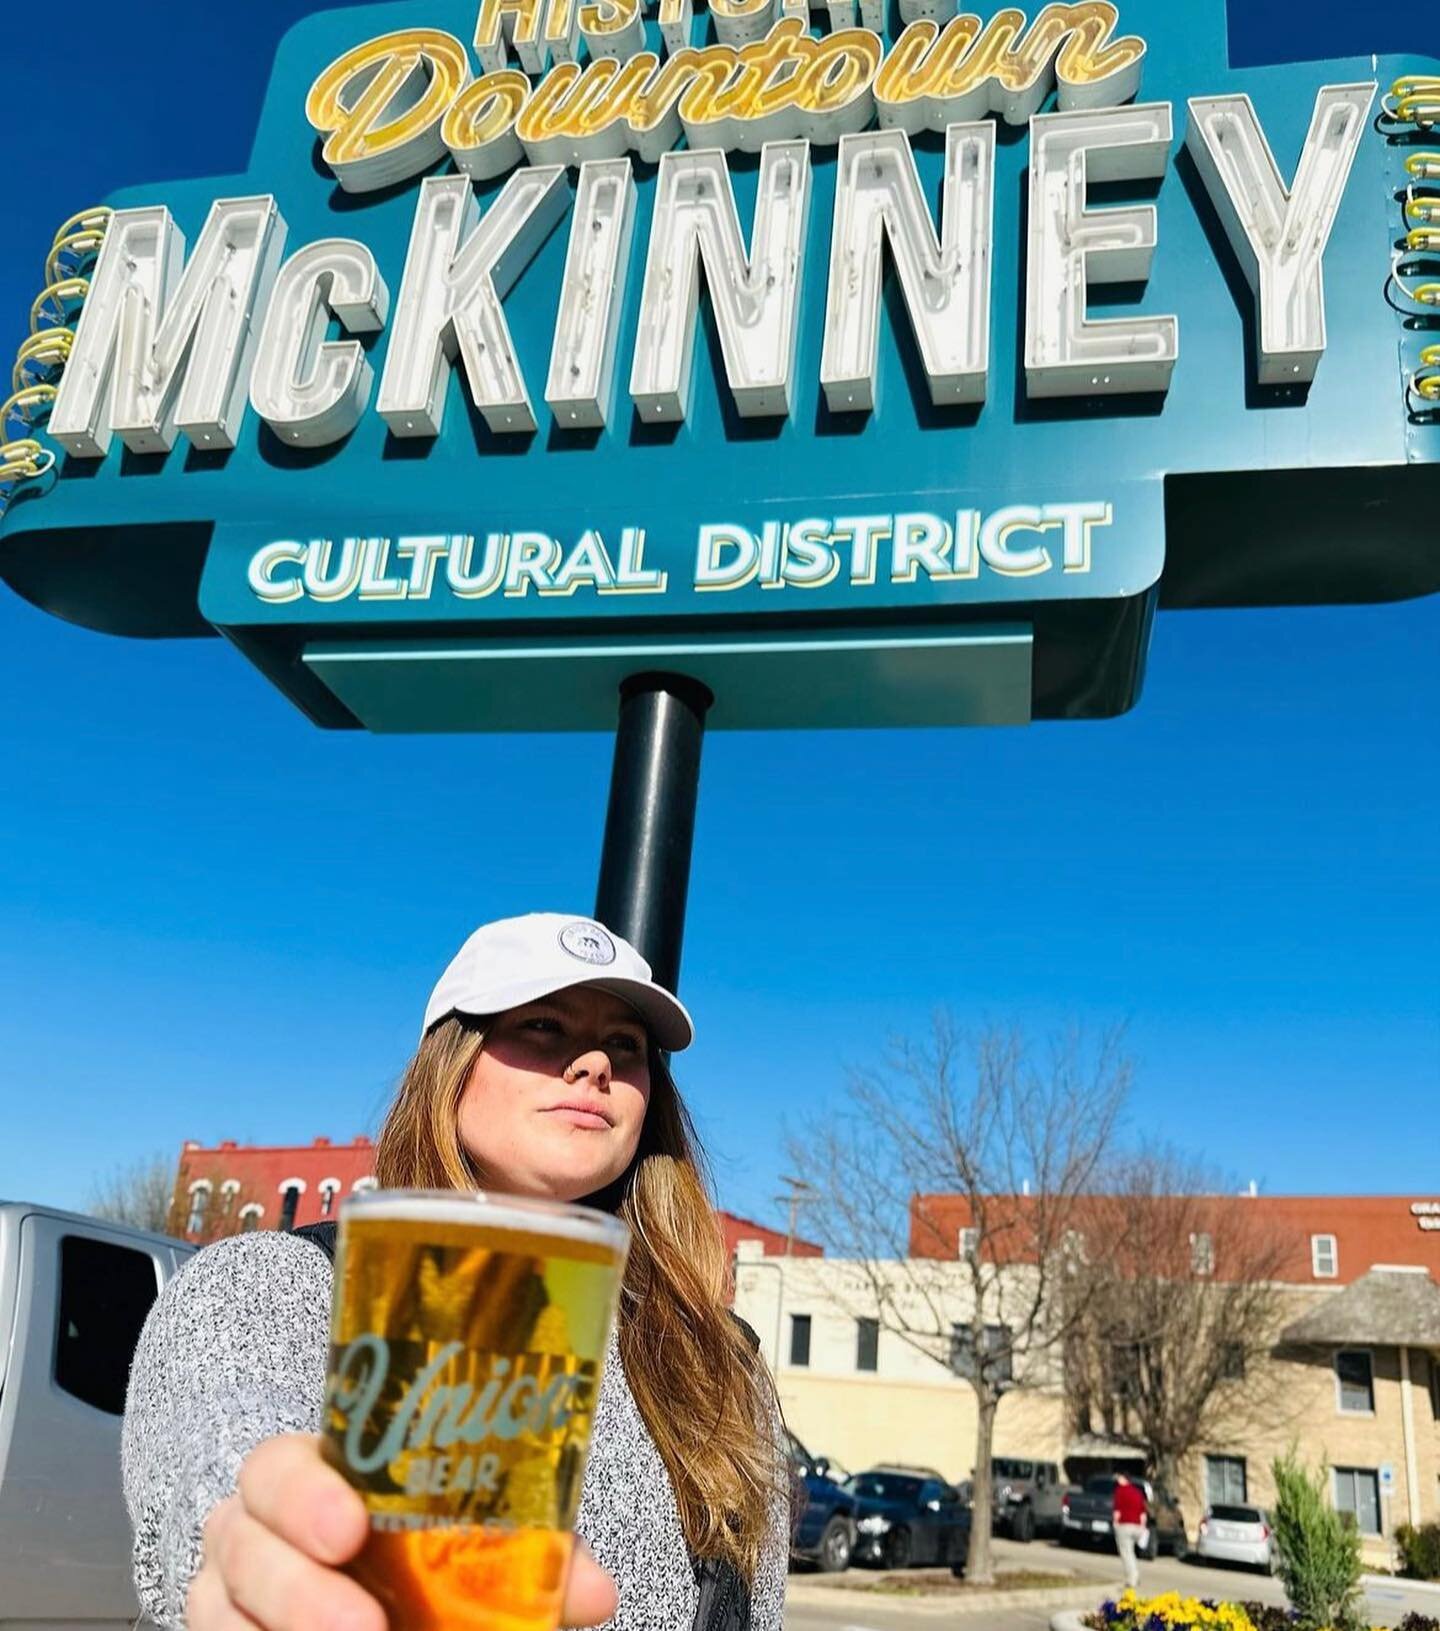 The Downtown Mckinney St Patrick&rsquo;s Day Beer Walk is tomorrow from 11am-6pm!🍻☘️Get tickets on eventbrite and join us for the Shenanigans! ☘️ 

#downtownmckinney #mckinneytx #stpats #texascraftbrewers